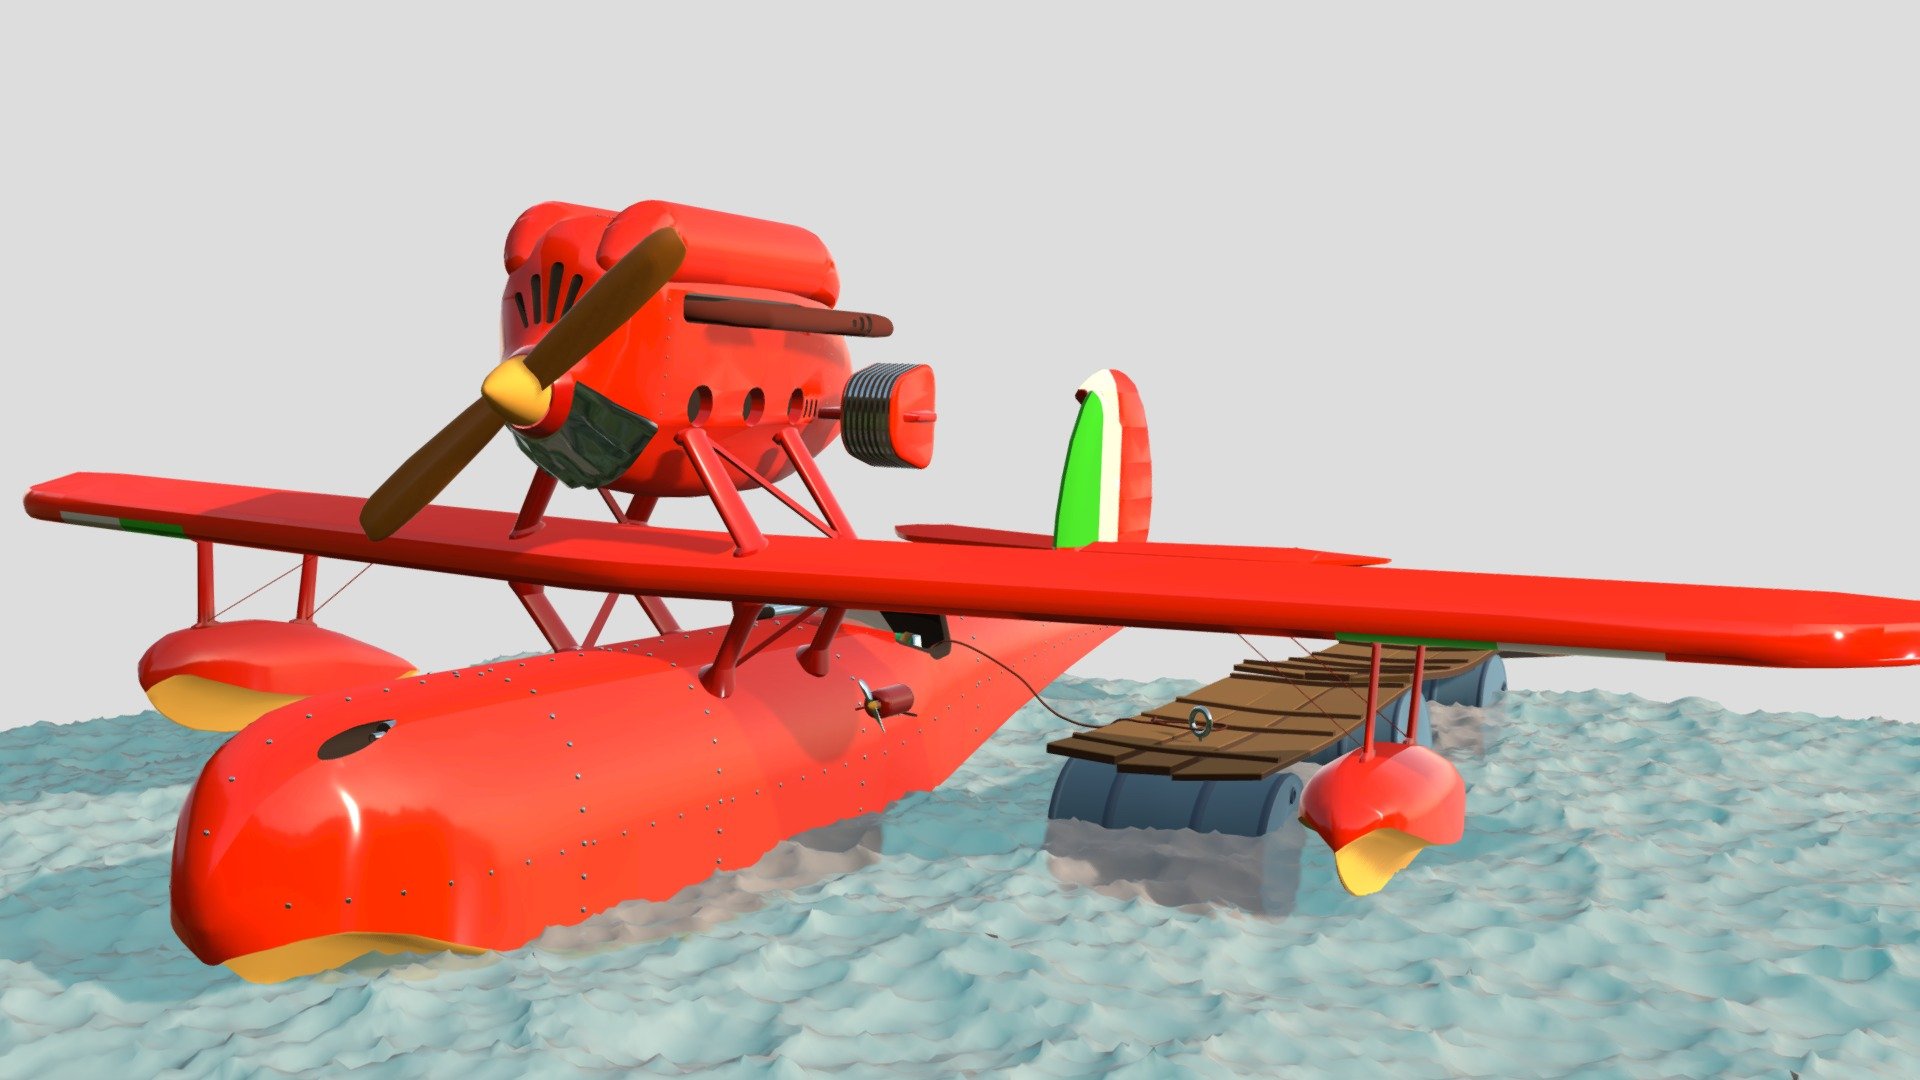 XYZ School draft practice. Just another plane from the Porco Rosso anime 3d model